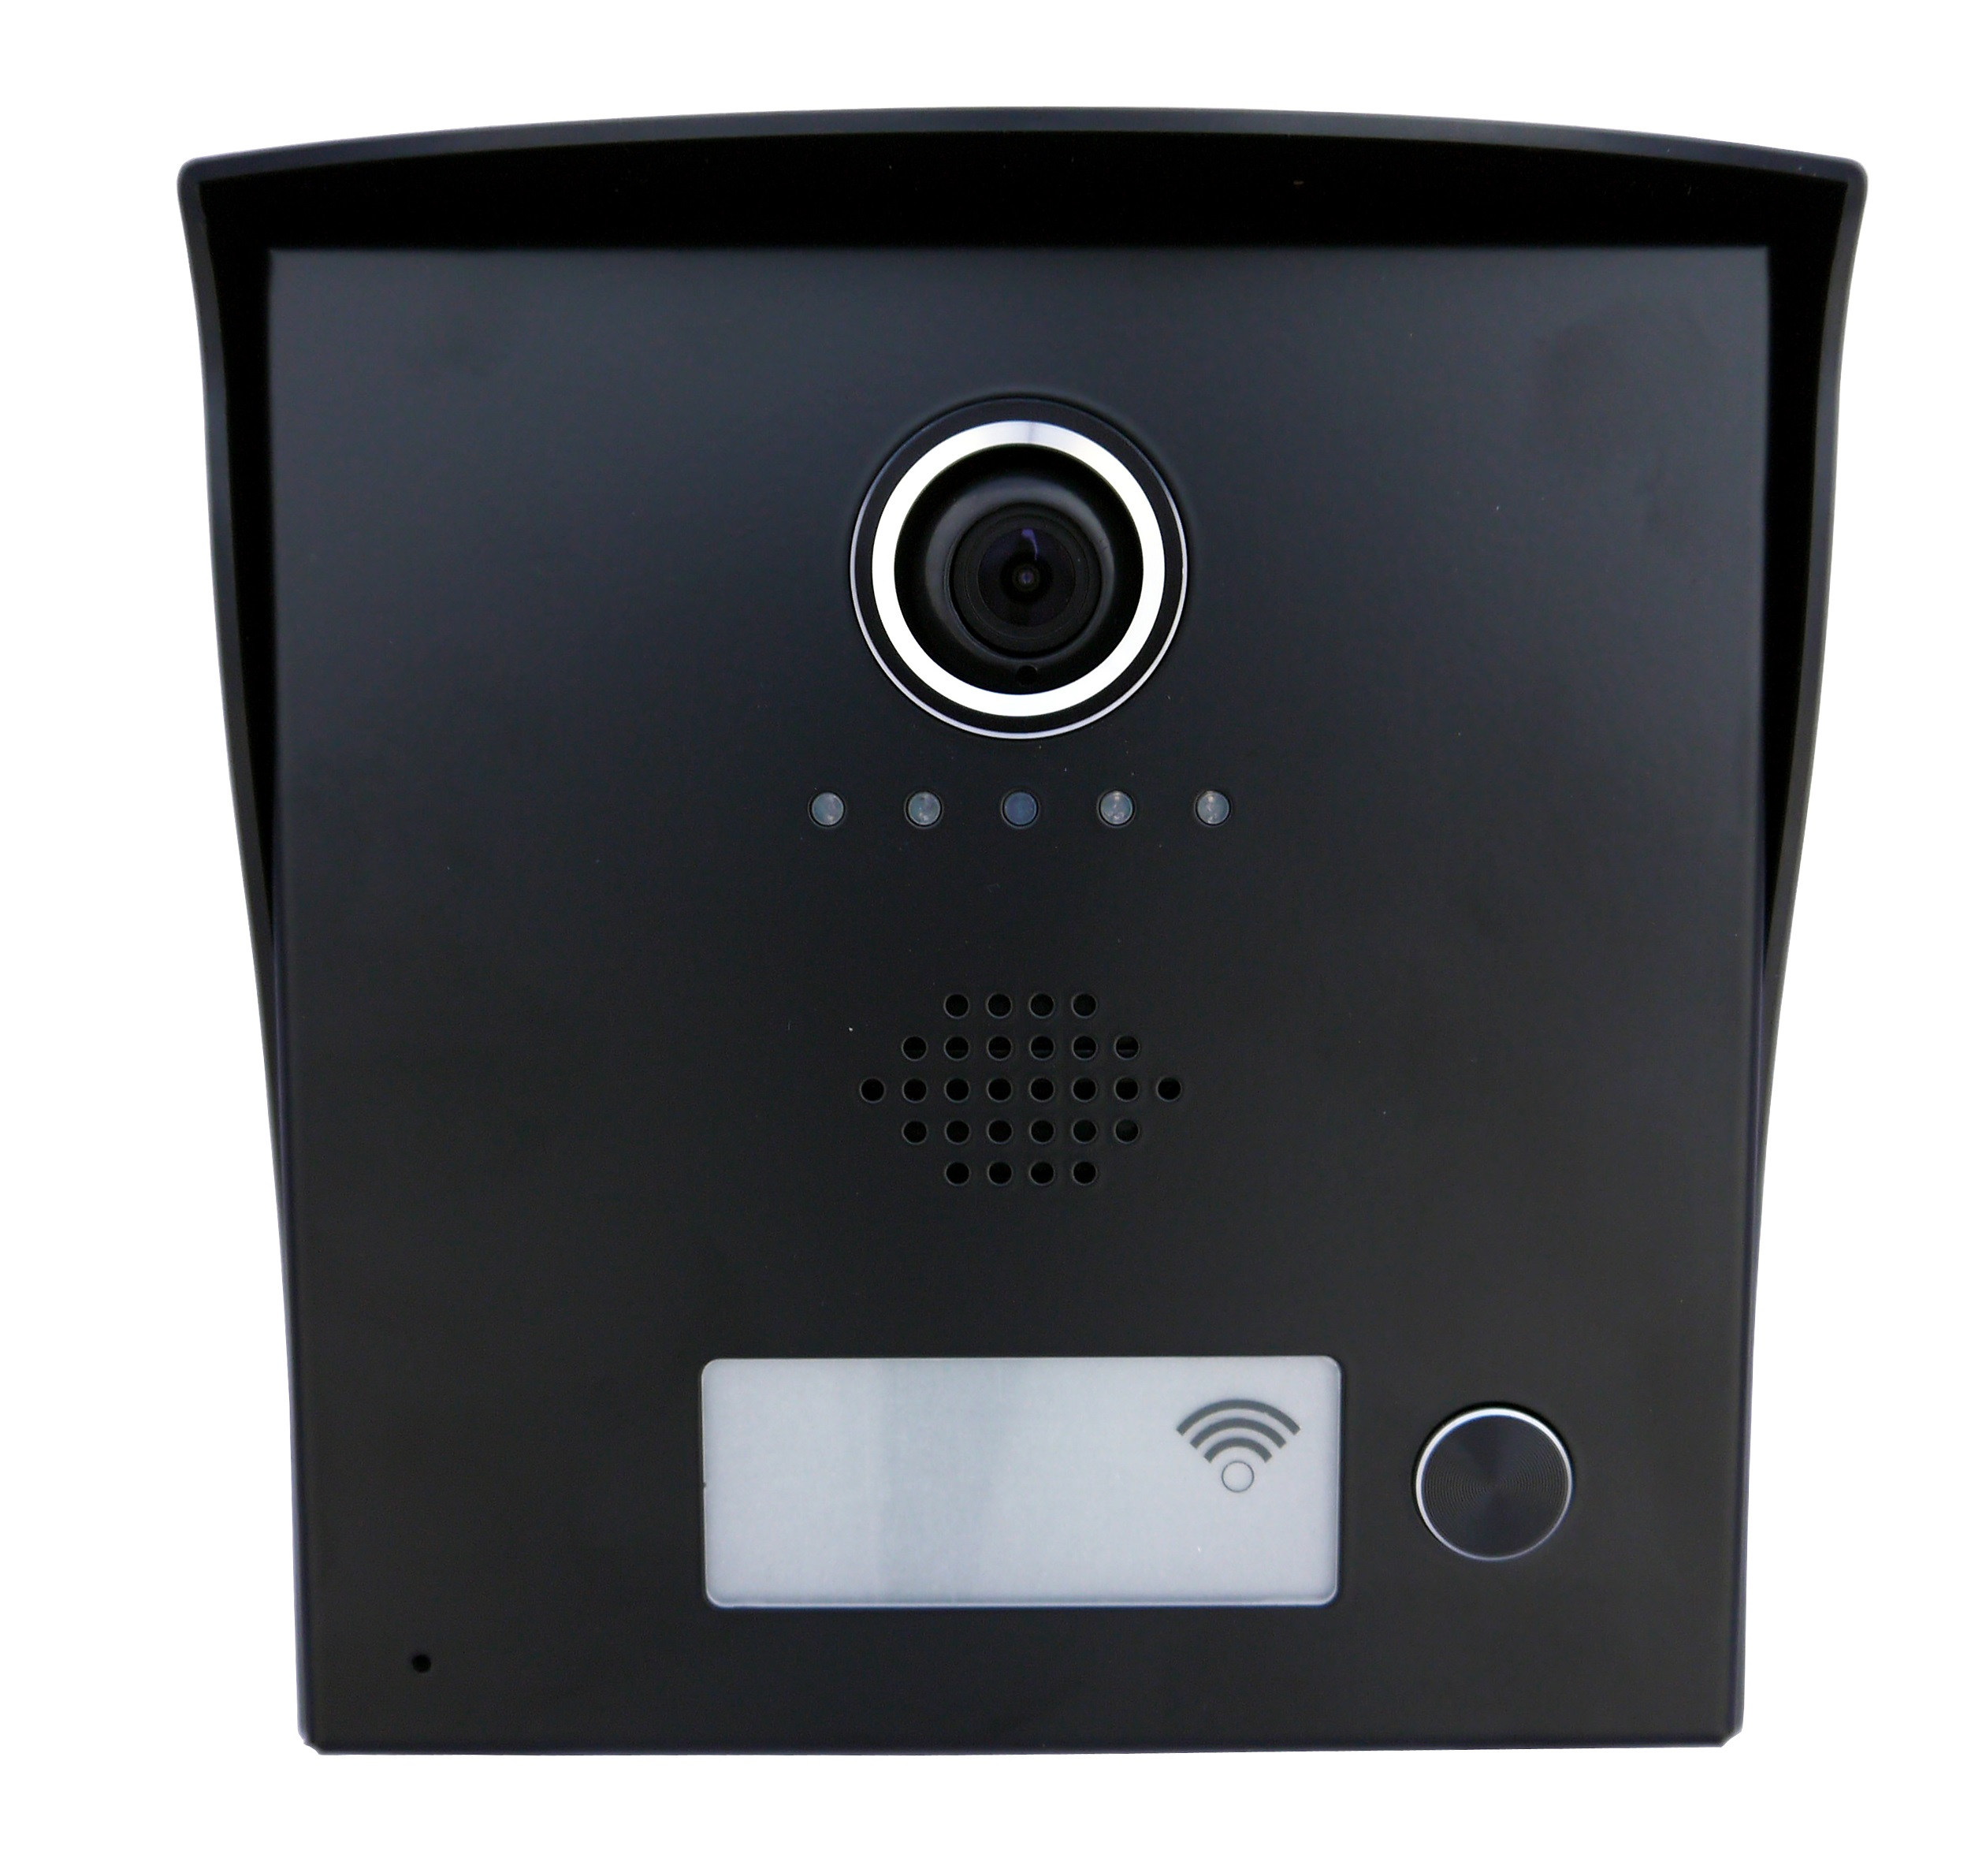 Sykik EYE Wi-Fi Video Door Bell, see who is at the door when the